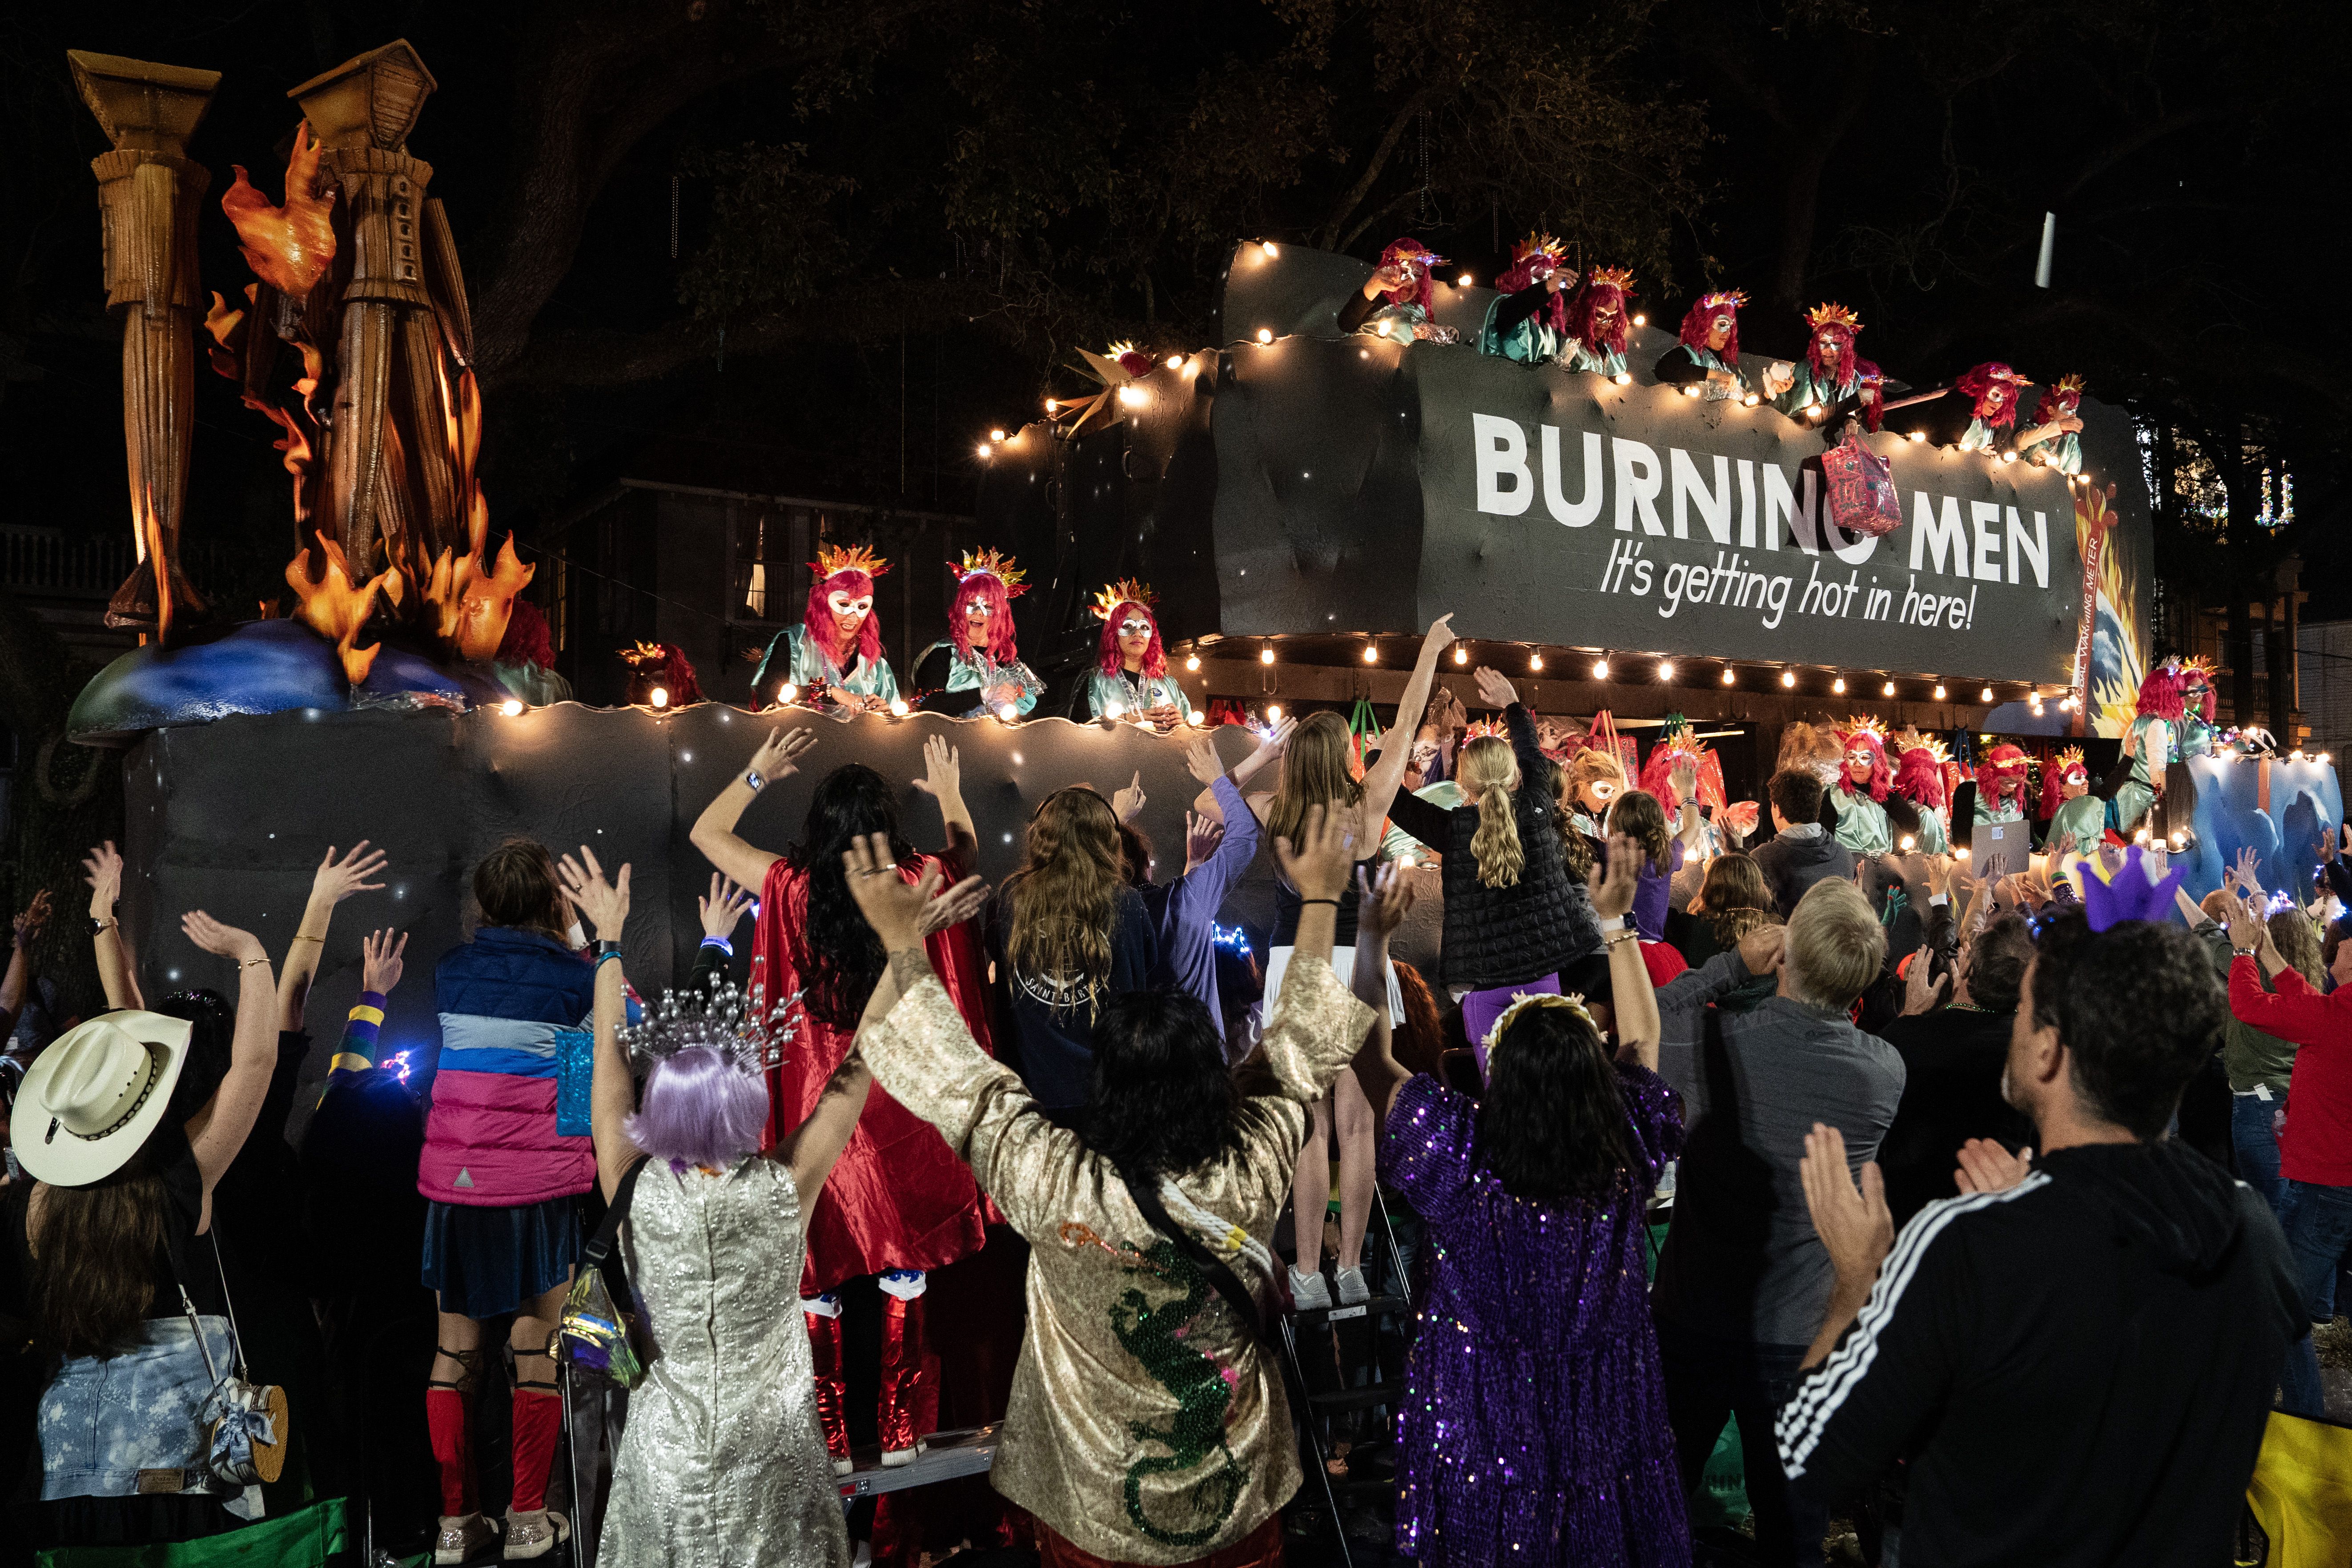 Photo shows a float in the Krewe of Muses parade